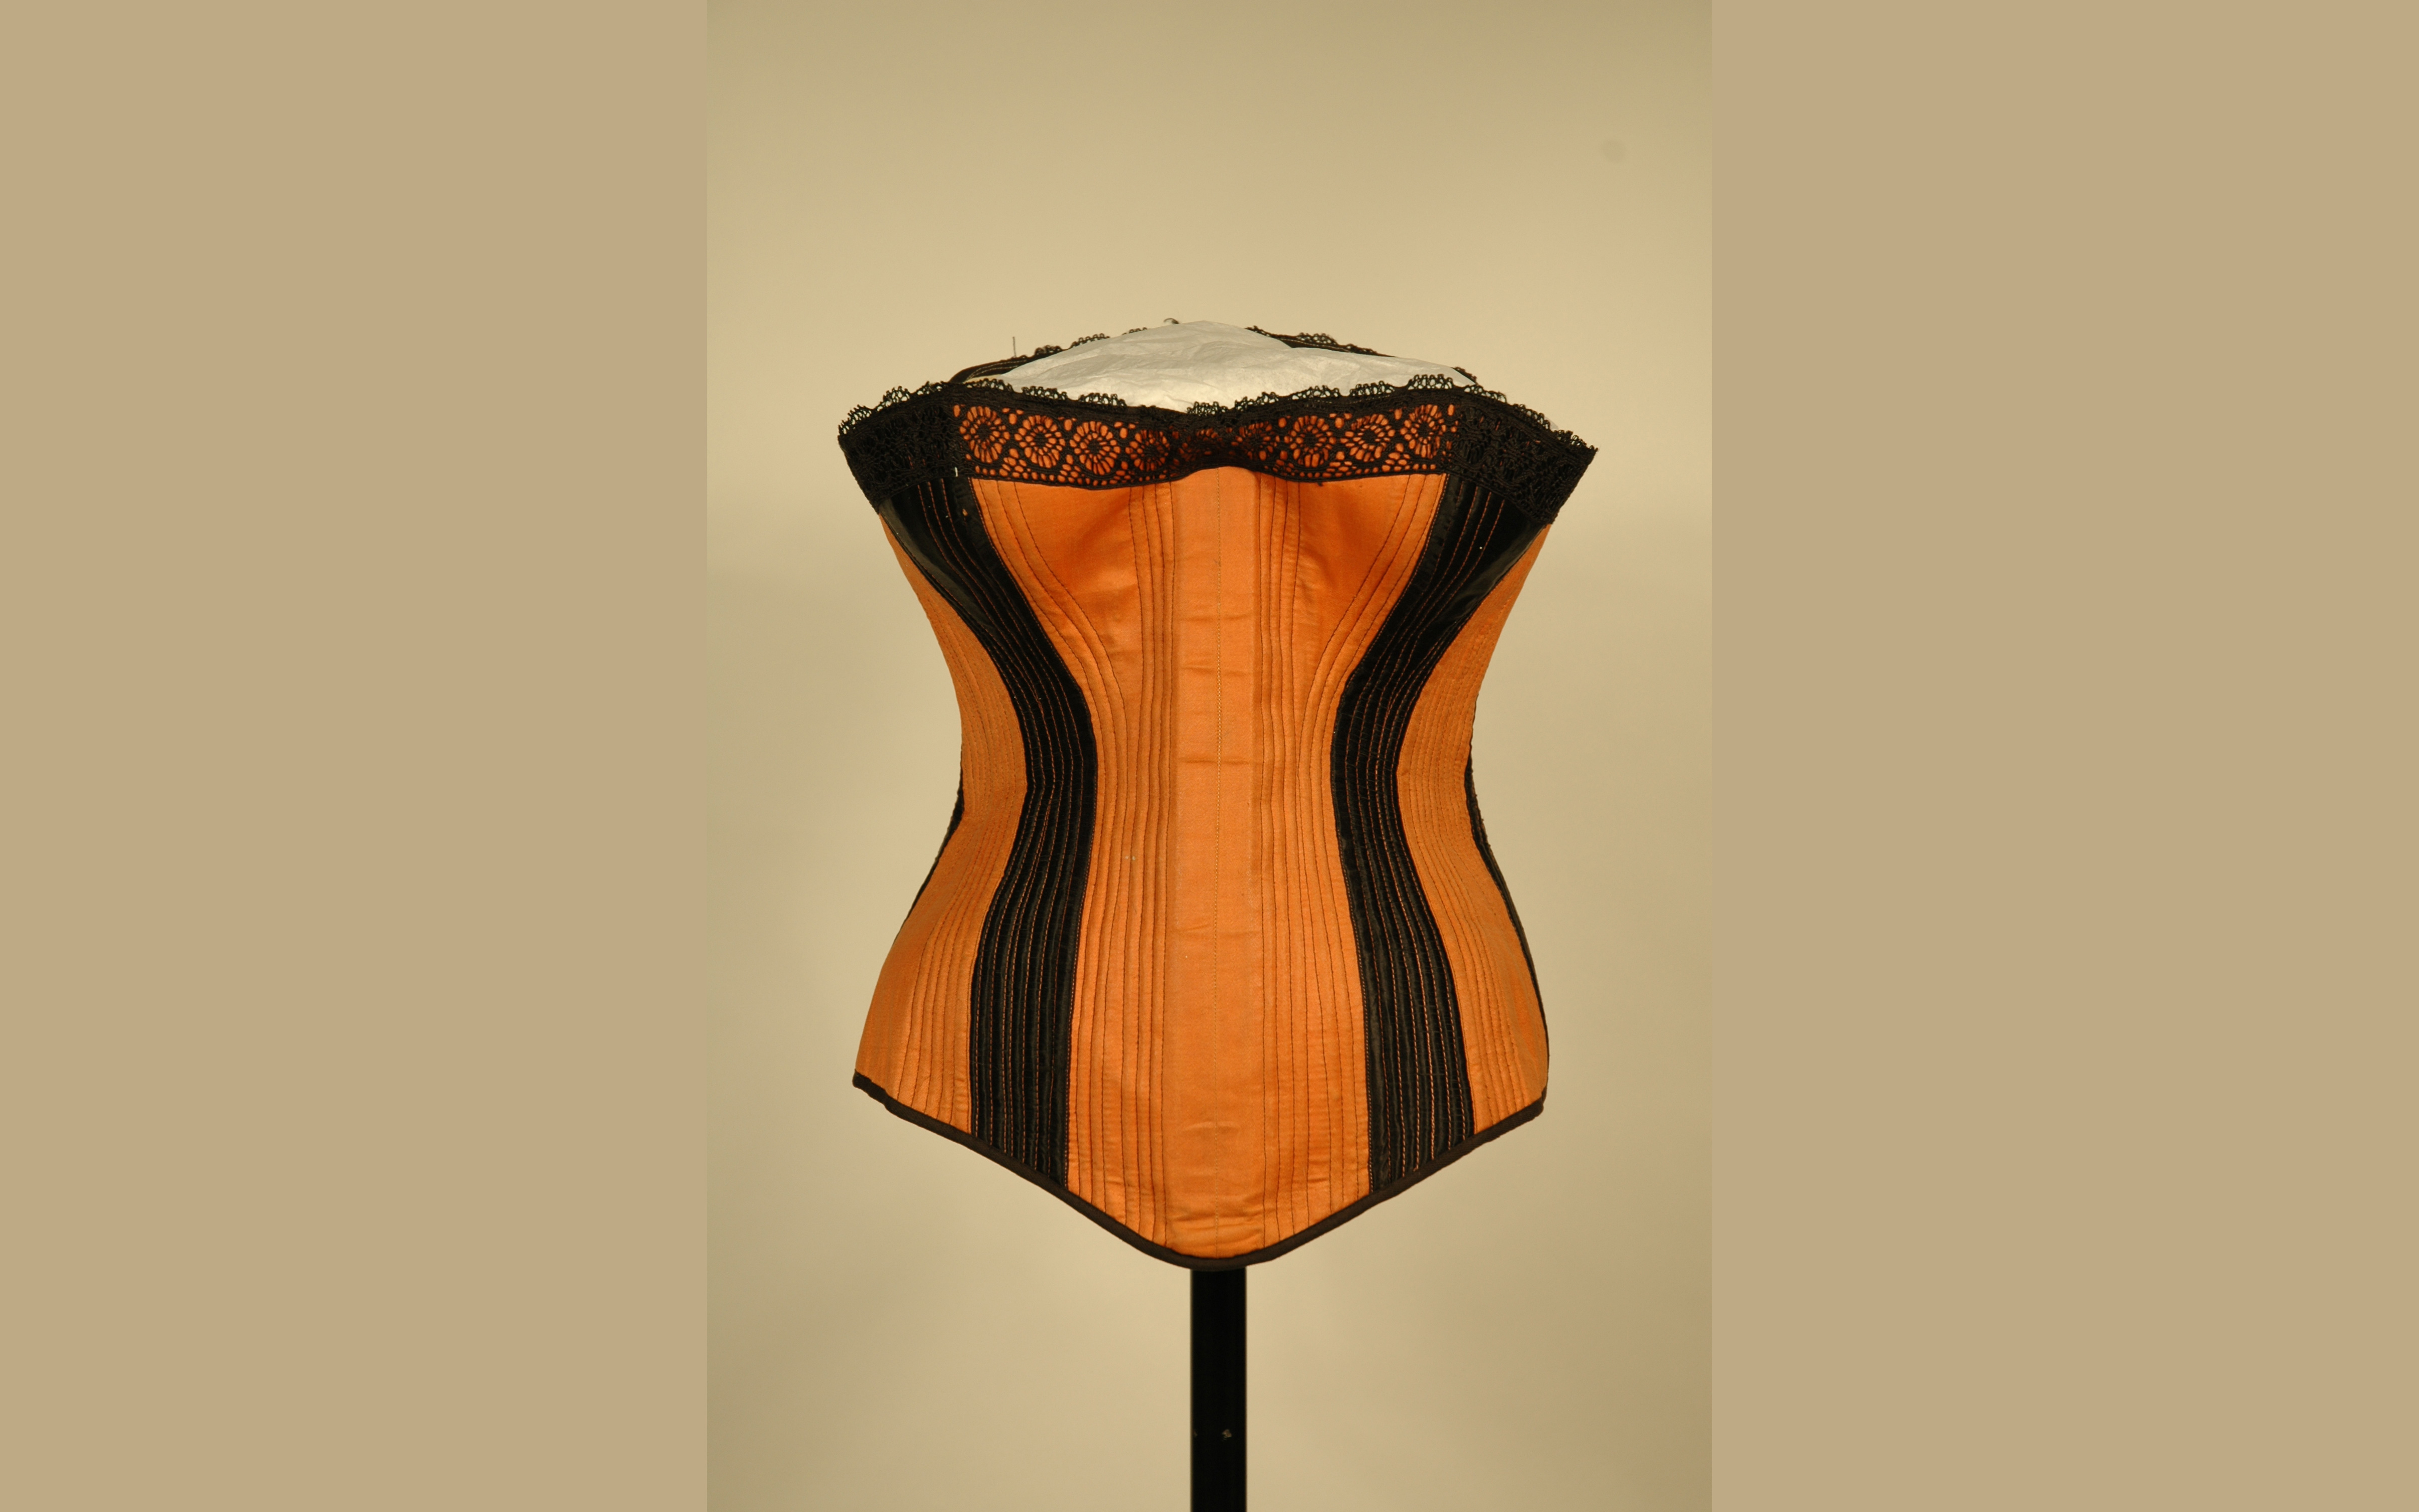 corset-with-back-lacing-image-credit-from-the-collections-of-leicestershire-county-council-the-symington-collection